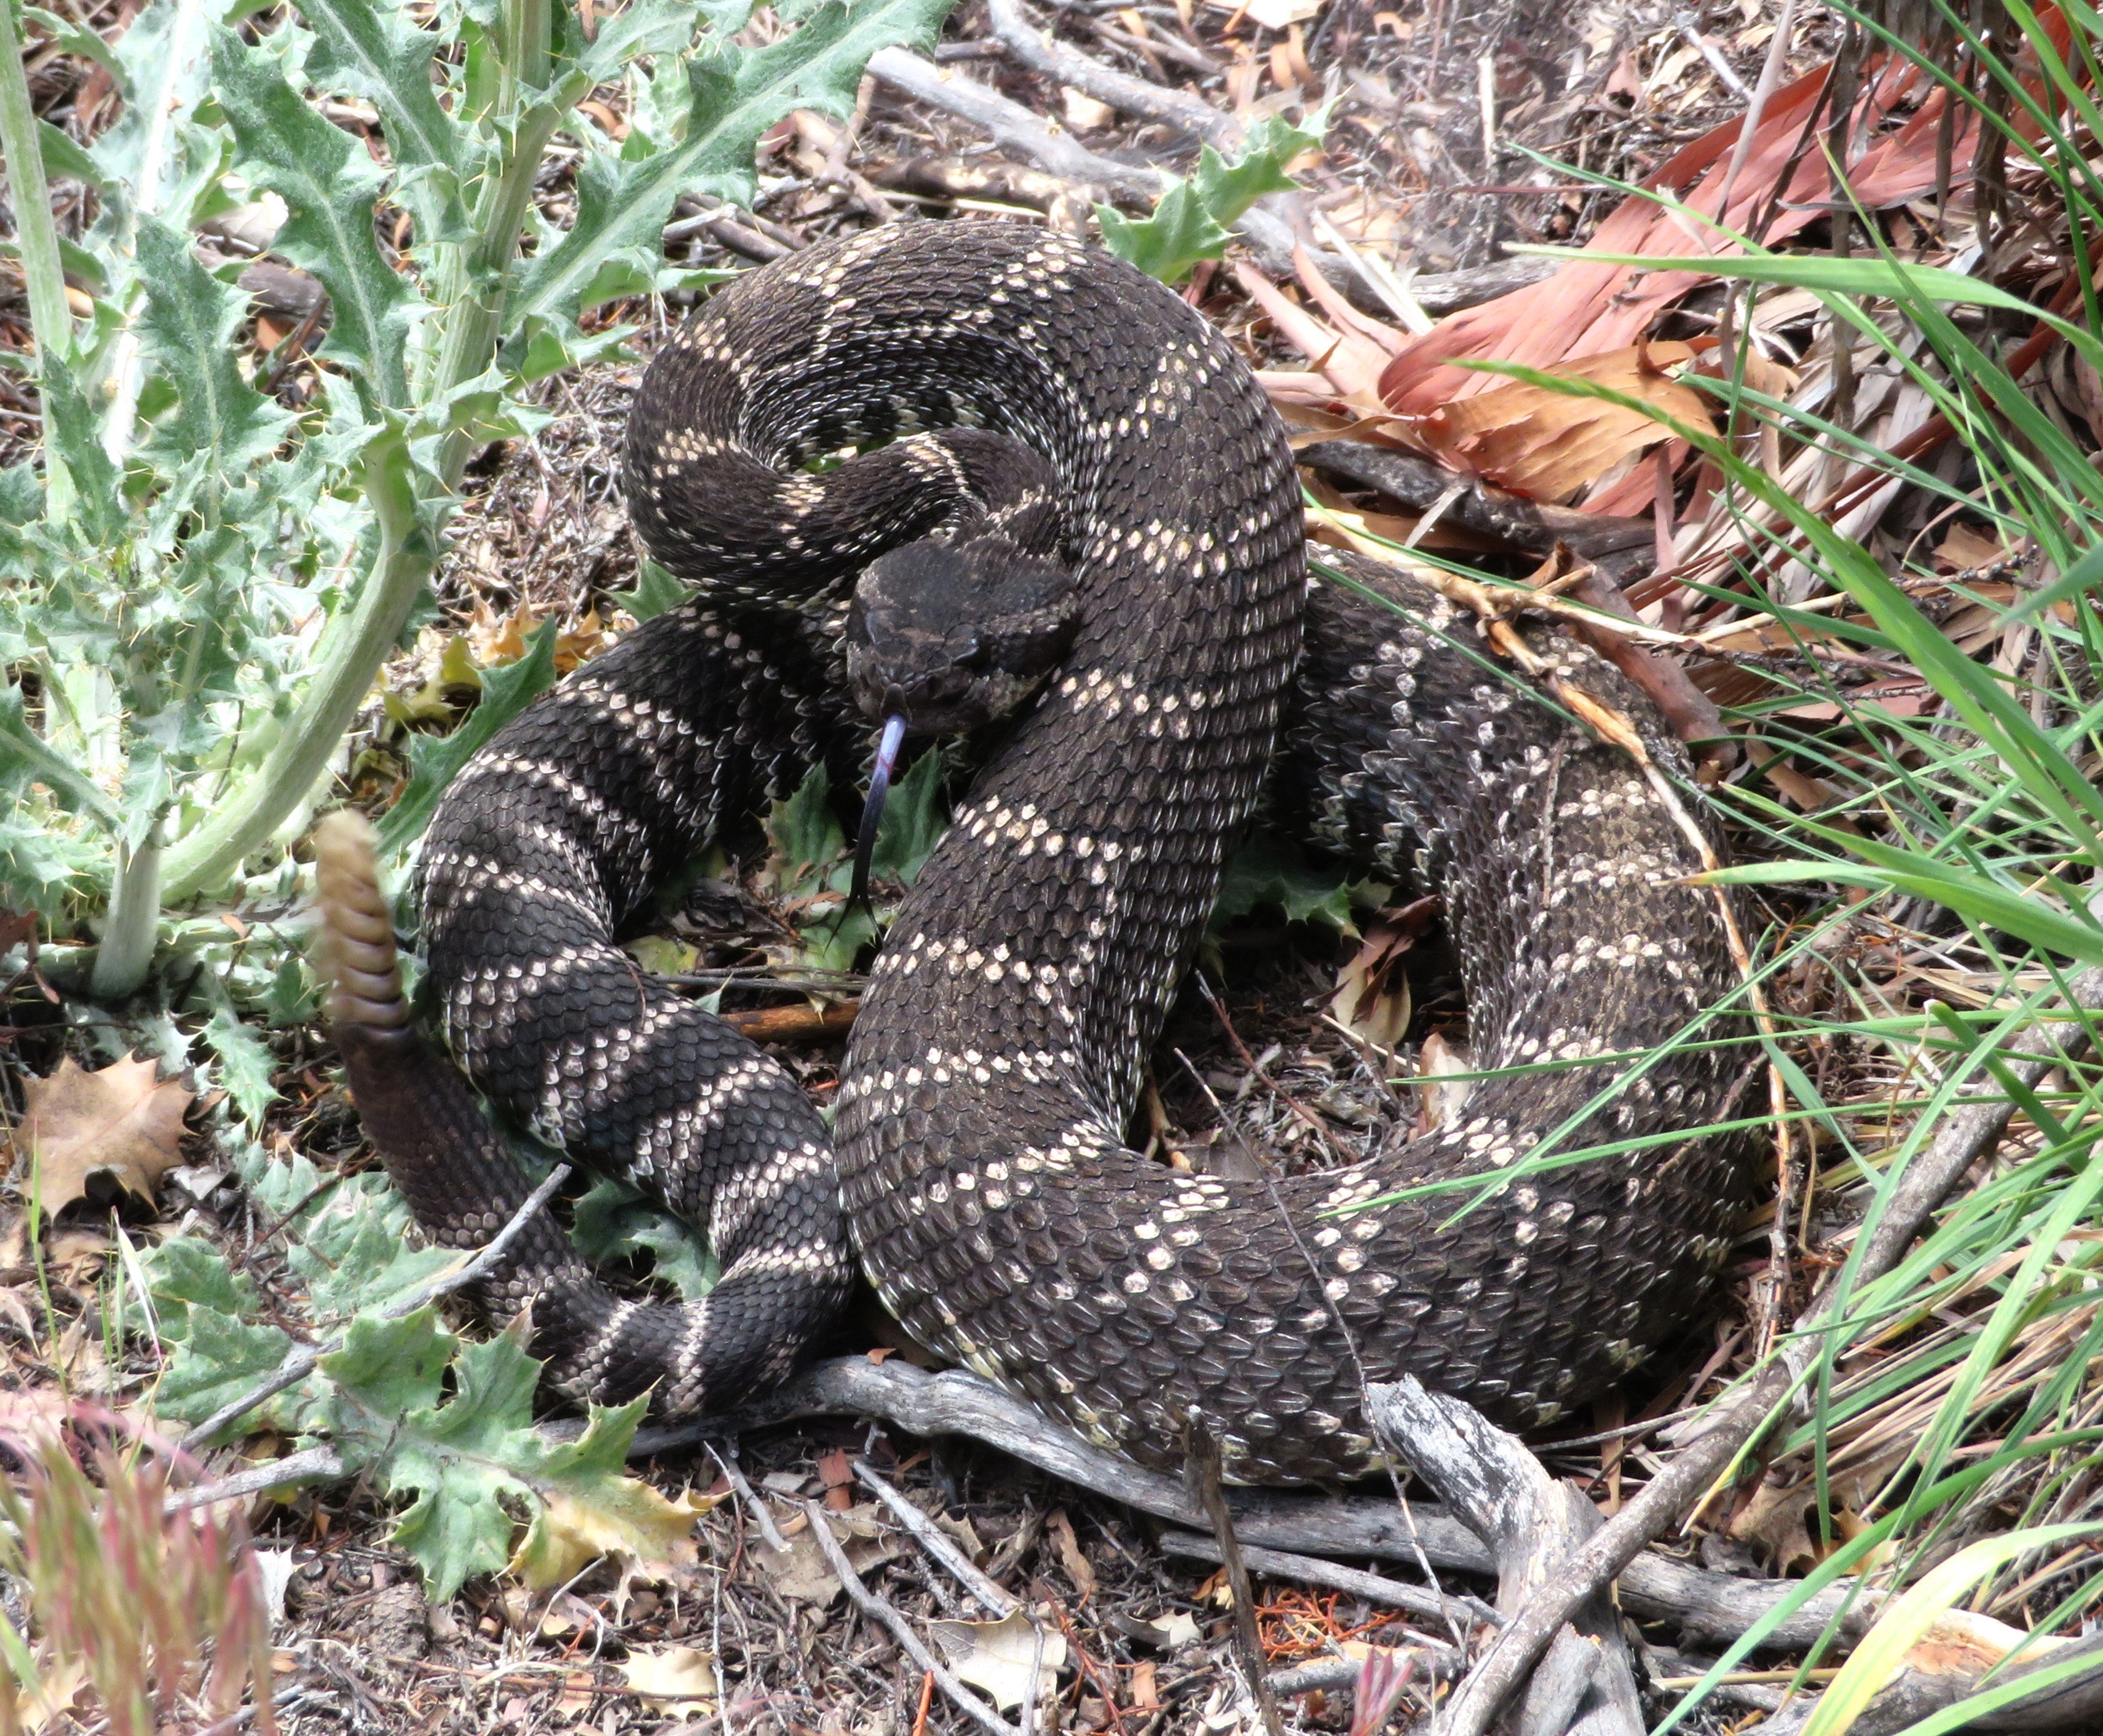 Blackish/brownish snake that looks very scary